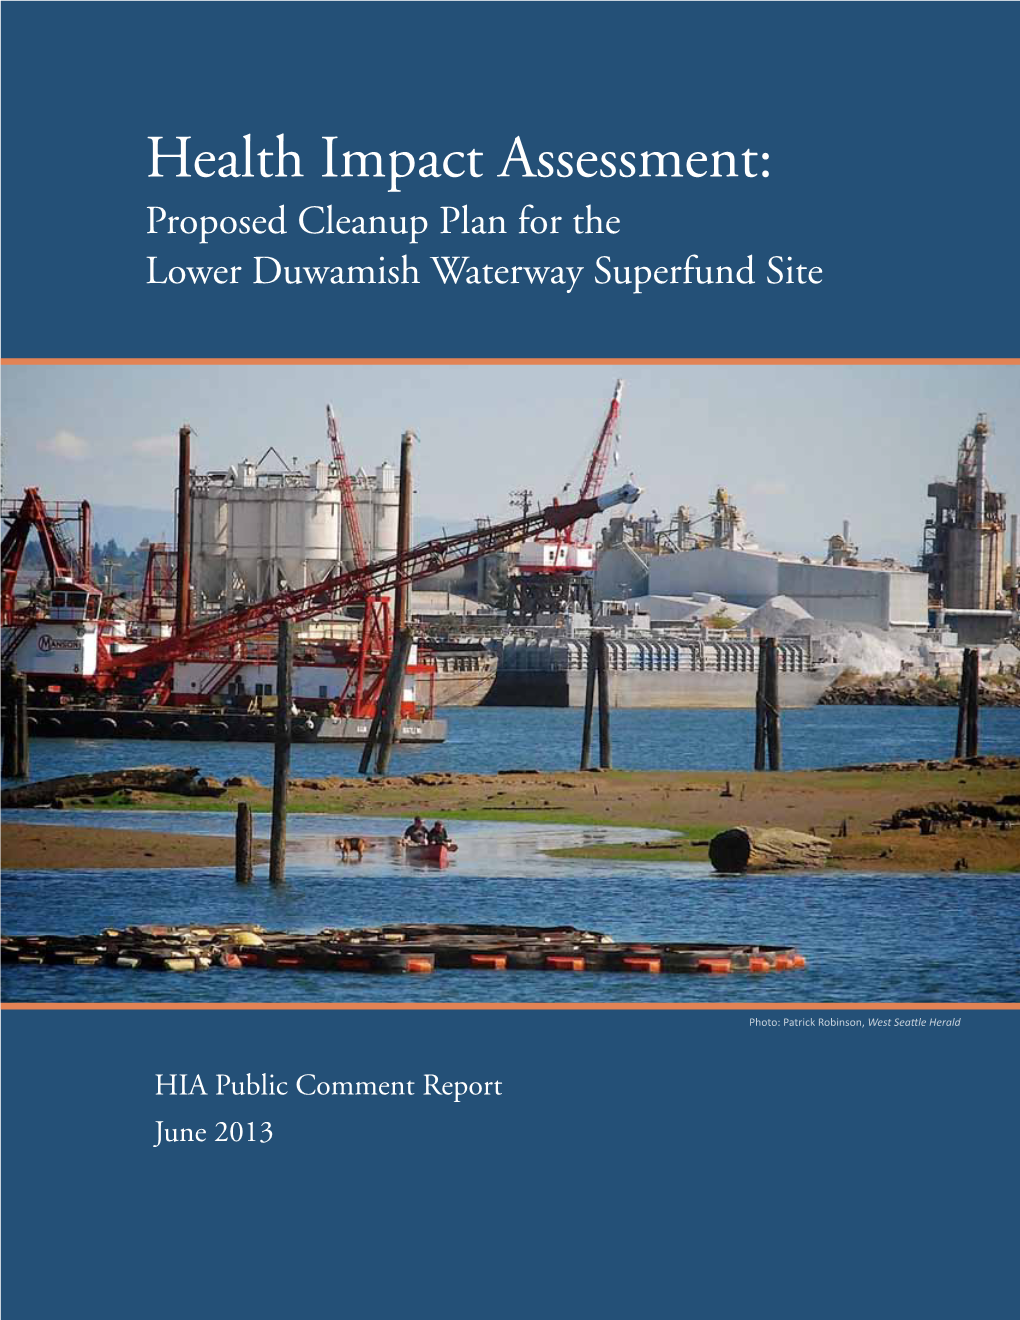 Health Impact Assessment: Proposed Cleanup Plan for the Lower Duwamish Waterway Superfund Site